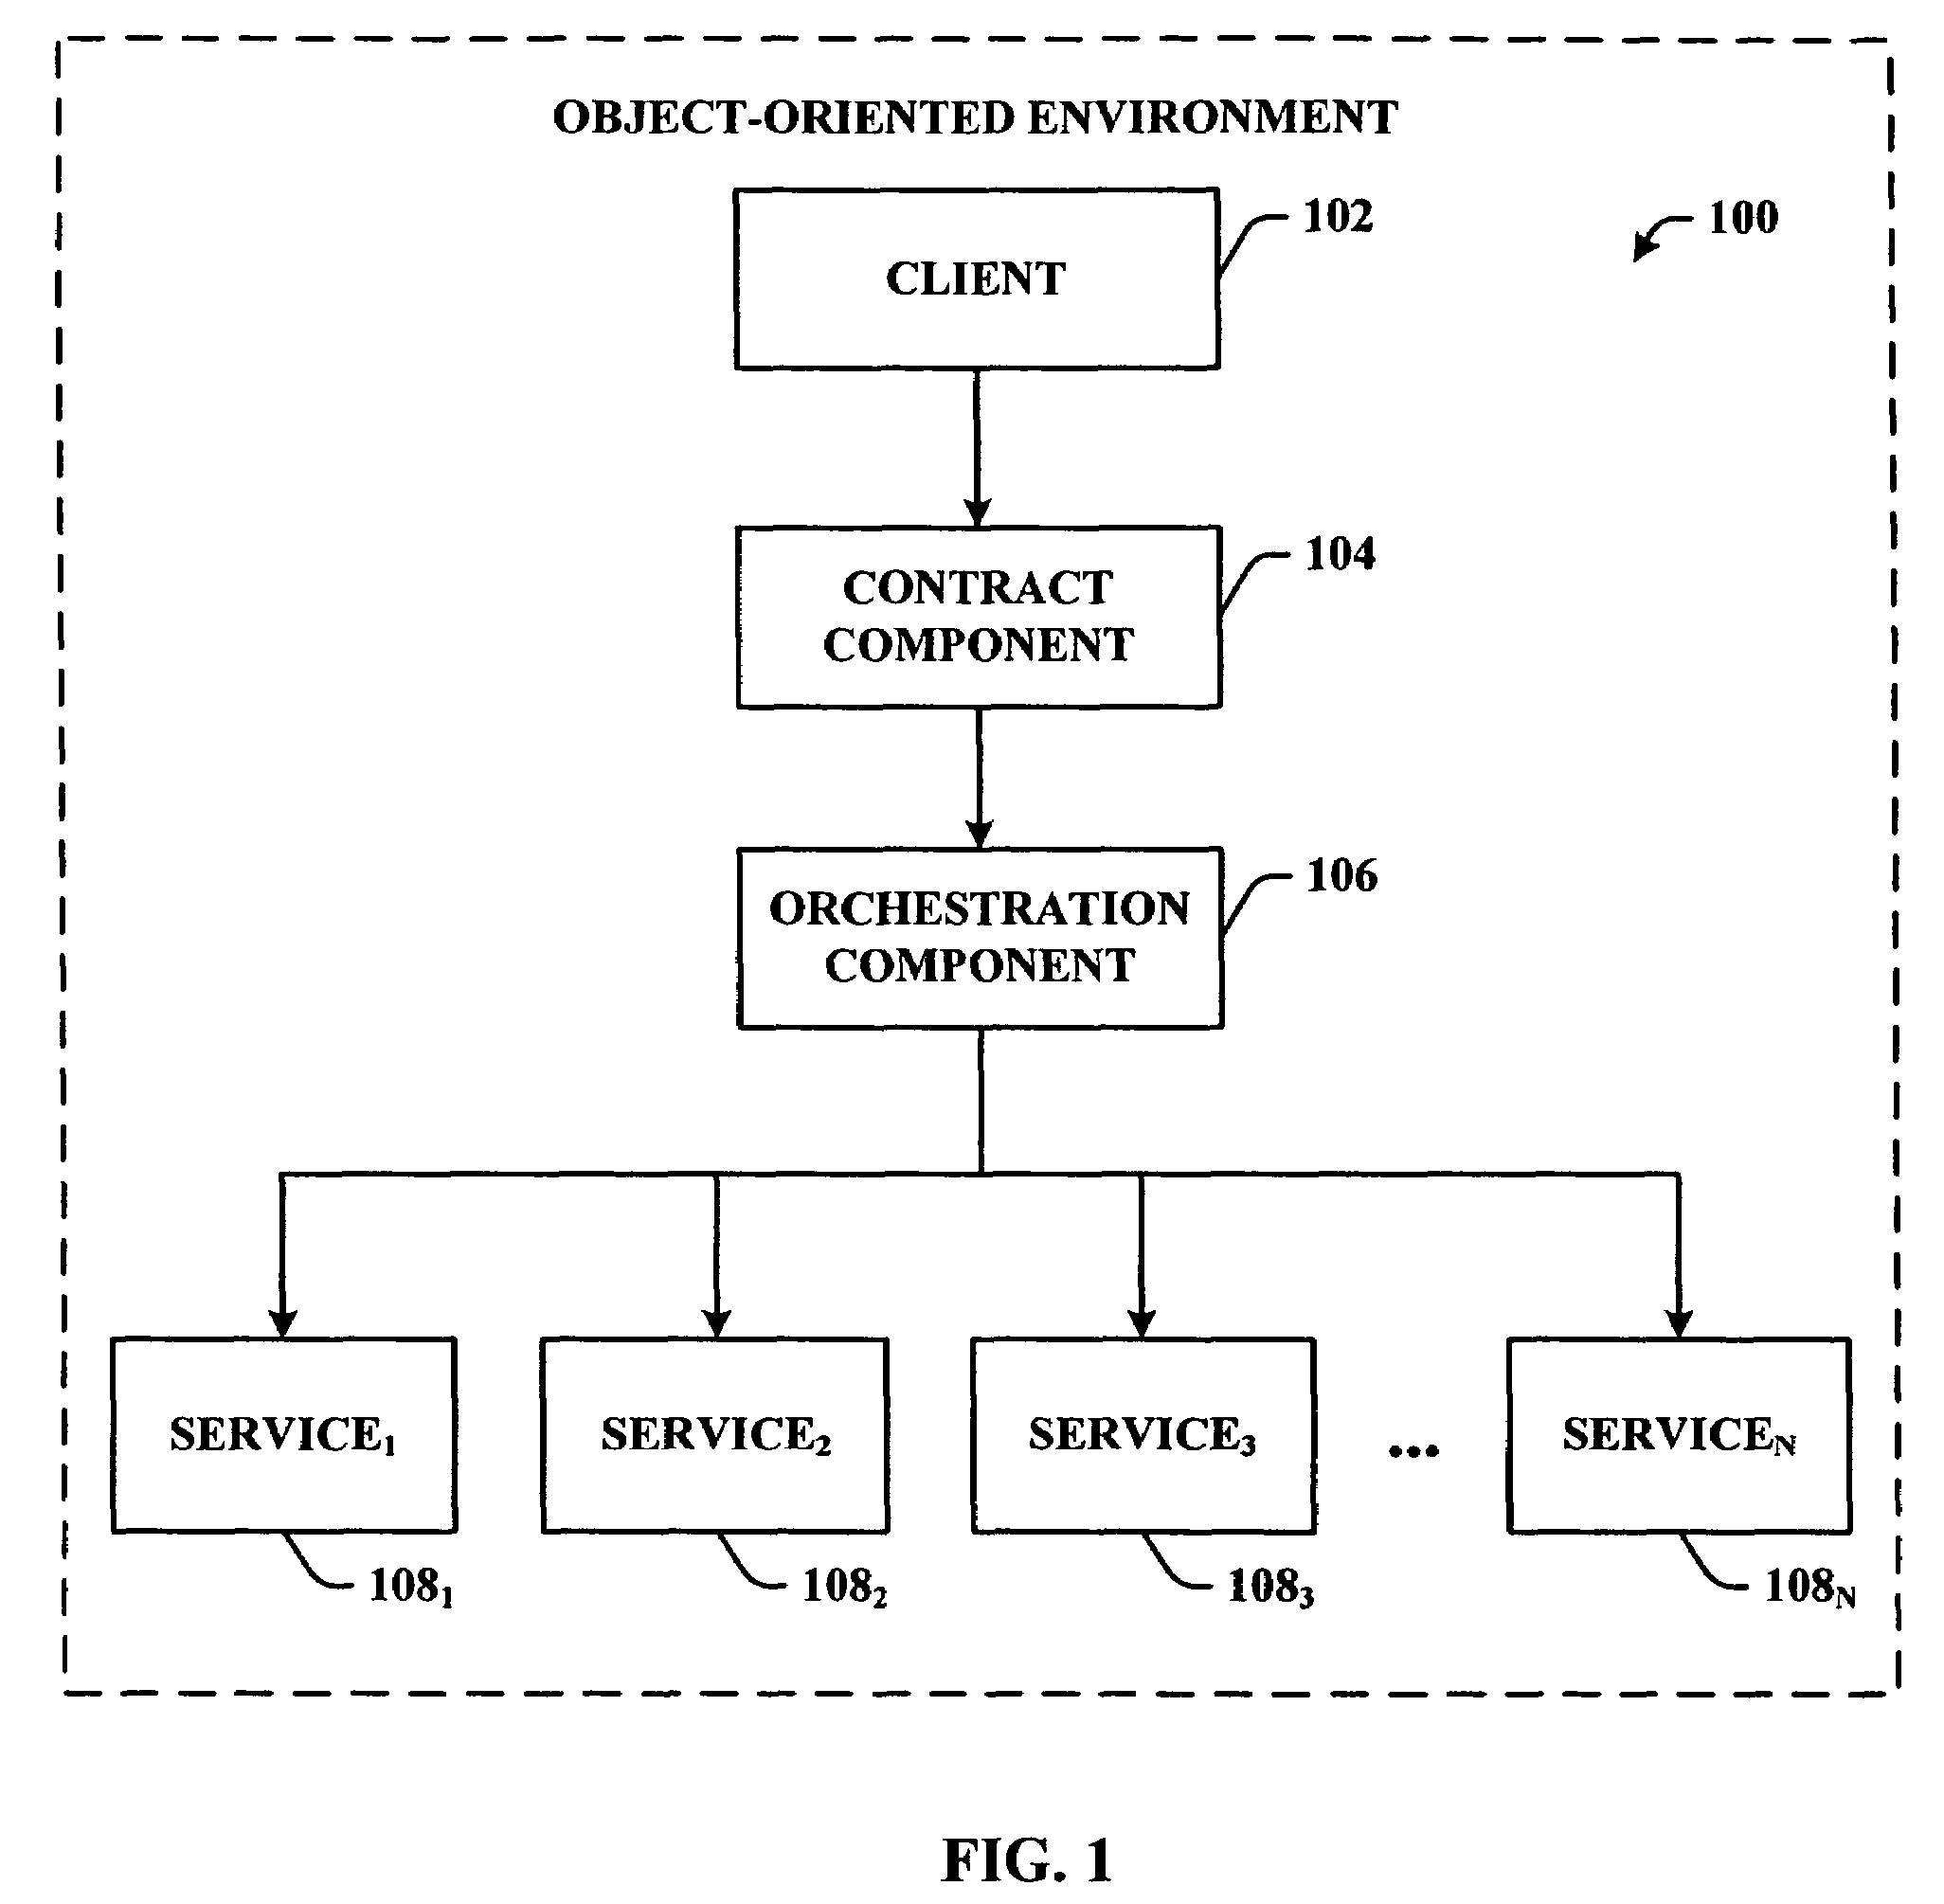 Implementation of concurrent programs in object-oriented languages